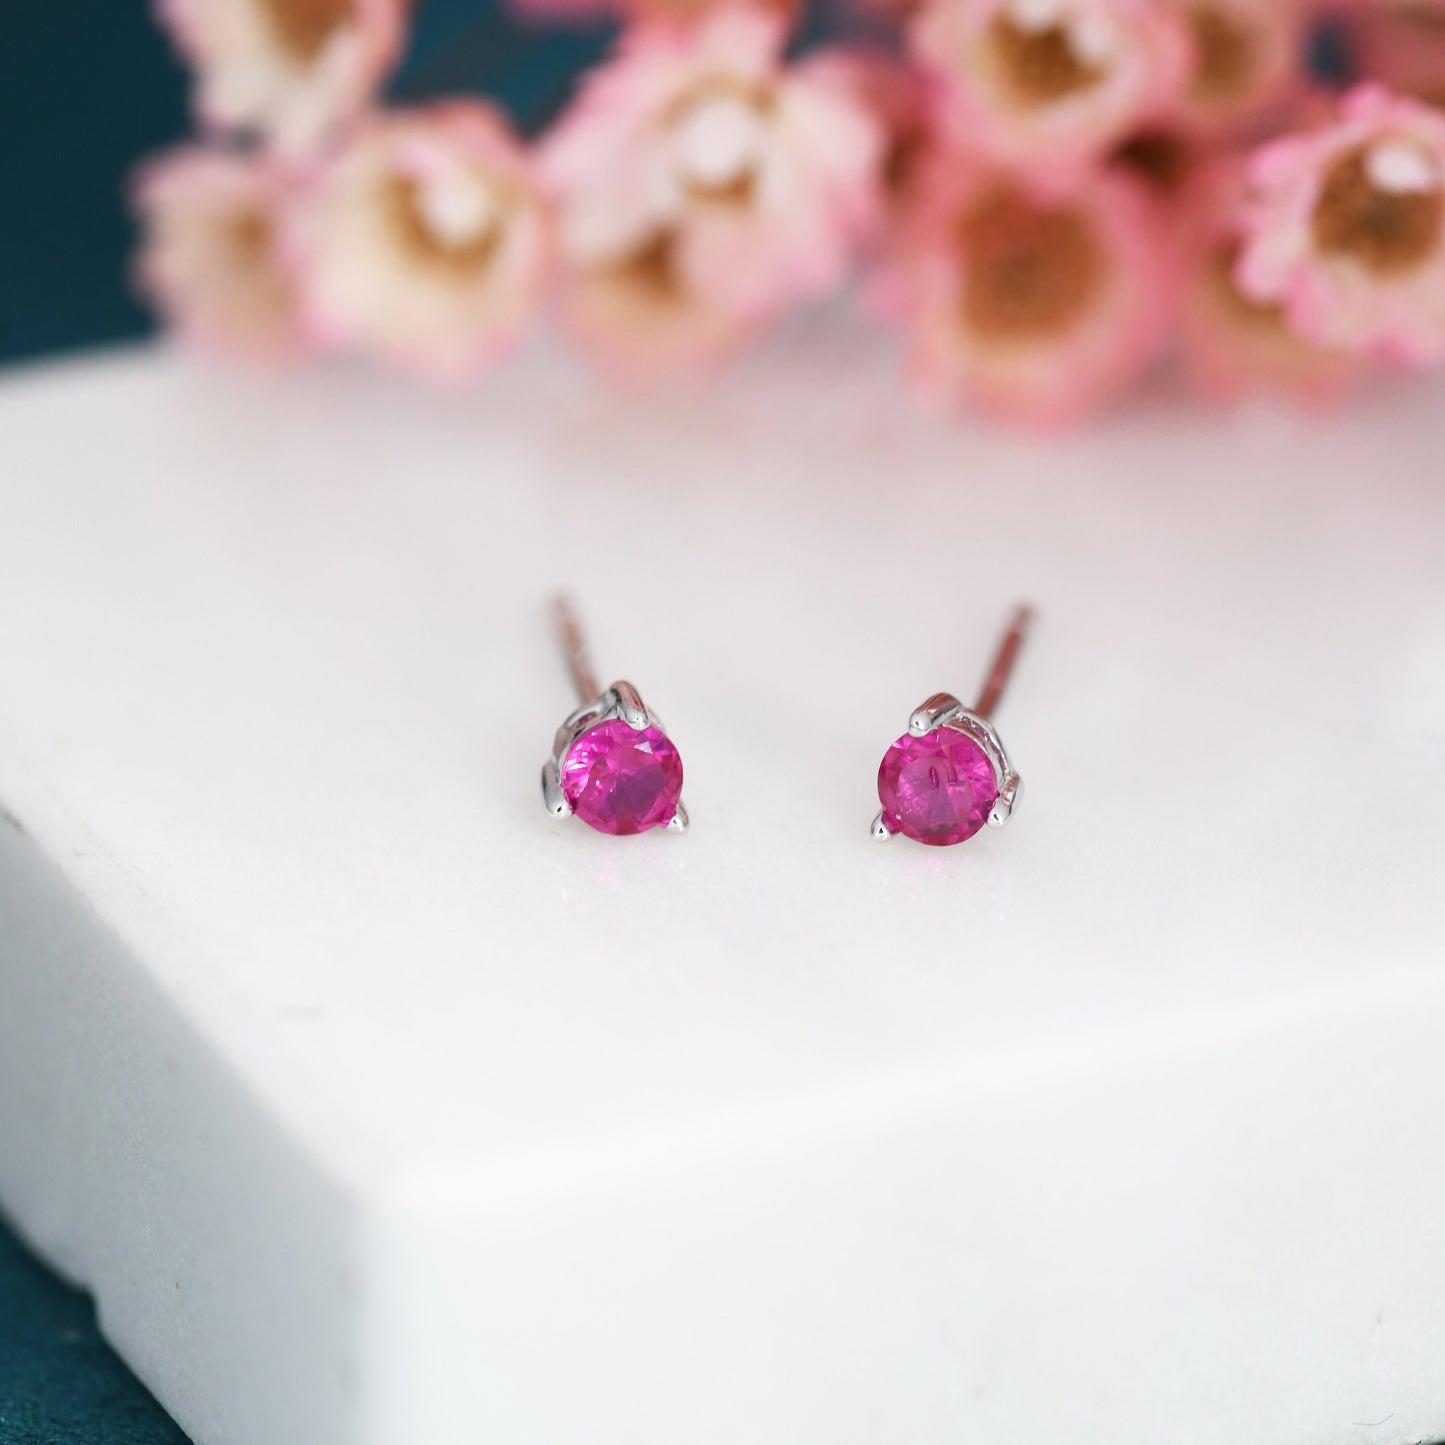 Ruby Pink CZ Stud Earrings in Sterling Silver, Silver or Gold, 3mm, Three Prong, Pink Stacking Earrings, July Birthstone